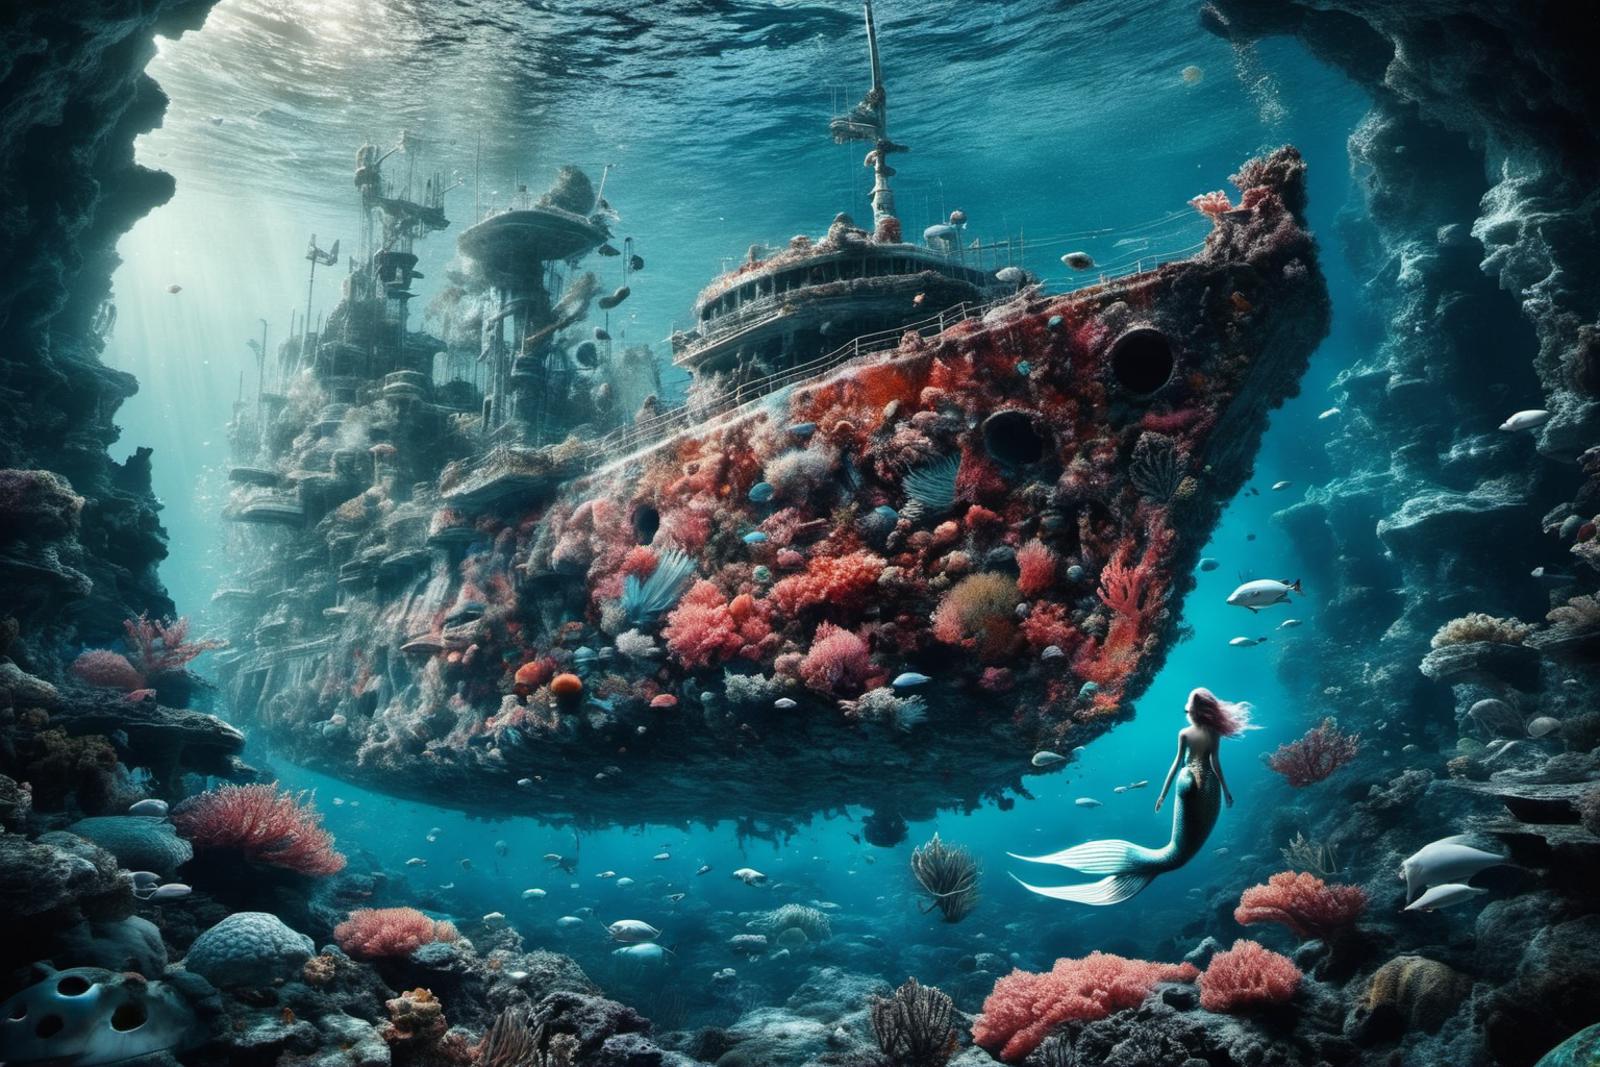 Artistic Underwater Scene with a Mermaid and an Underwater Castle or Ship